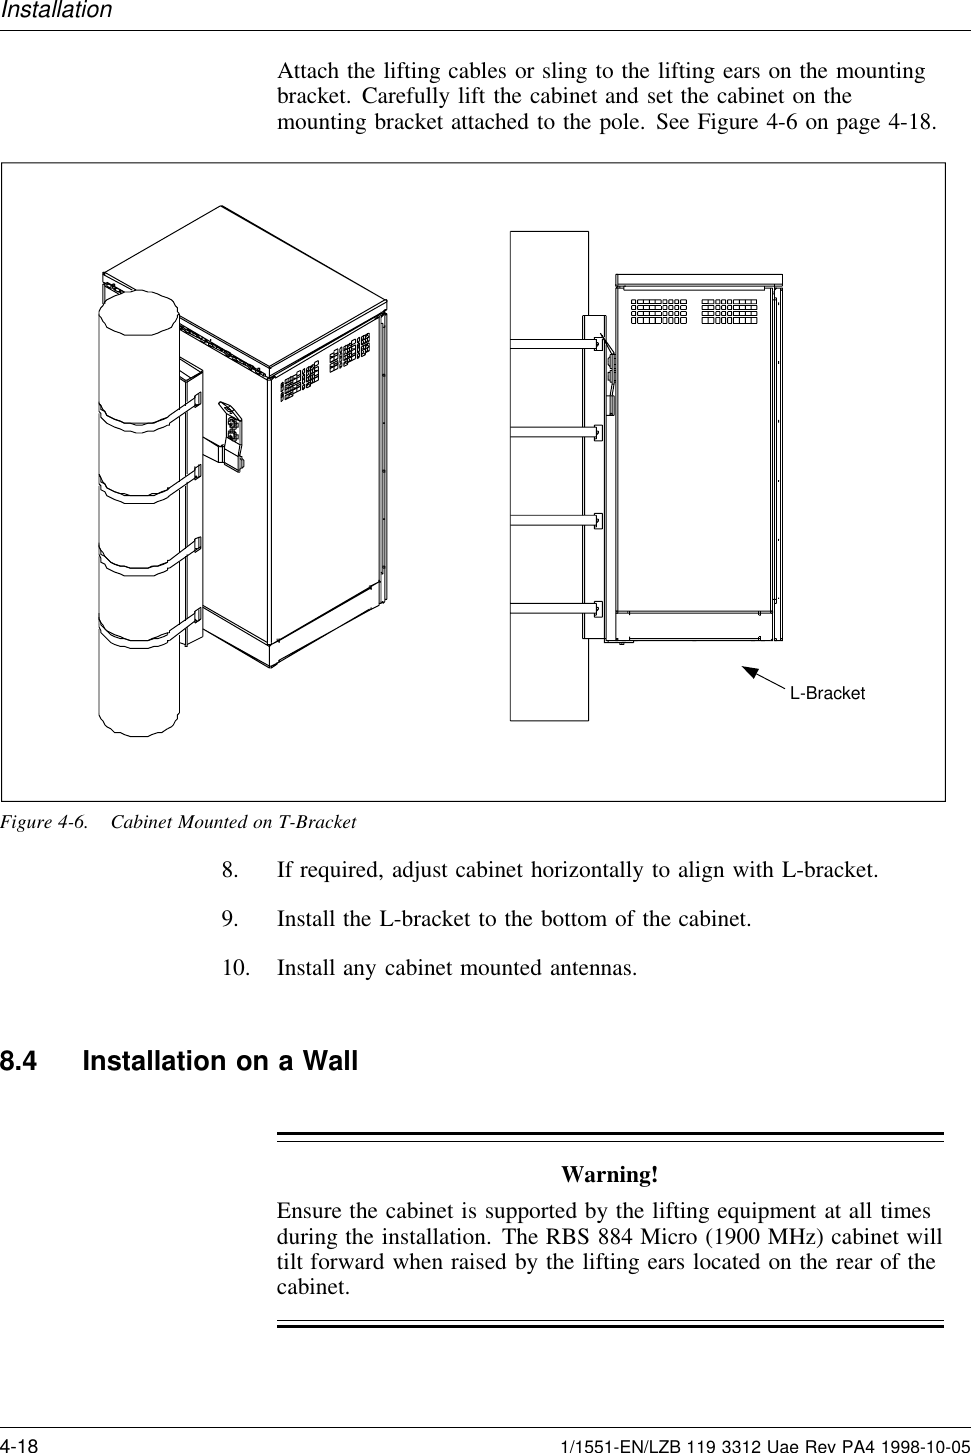 InstallationAttach the lifting cables or sling to the lifting ears on the mountingbracket. Carefully lift the cabinet and set the cabinet on themounting bracket attached to the pole. See Figure 4-6 on page 4-18.L-BracketFigure 4-6. Cabinet Mounted on T-Bracket8. If required, adjust cabinet horizontally to align with L-bracket.9. Install the L-bracket to the bottom of the cabinet.10. Install any cabinet mounted antennas.8.4 Installation on a WallWarning!Ensure the cabinet is supported by the lifting equipment at all timesduring the installation. The RBS 884 Micro (1900 MHz) cabinet willtilt forward when raised by the lifting ears located on the rear of thecabinet.4-18 1/1551-EN/LZB 119 3312 Uae Rev PA4 1998-10-05